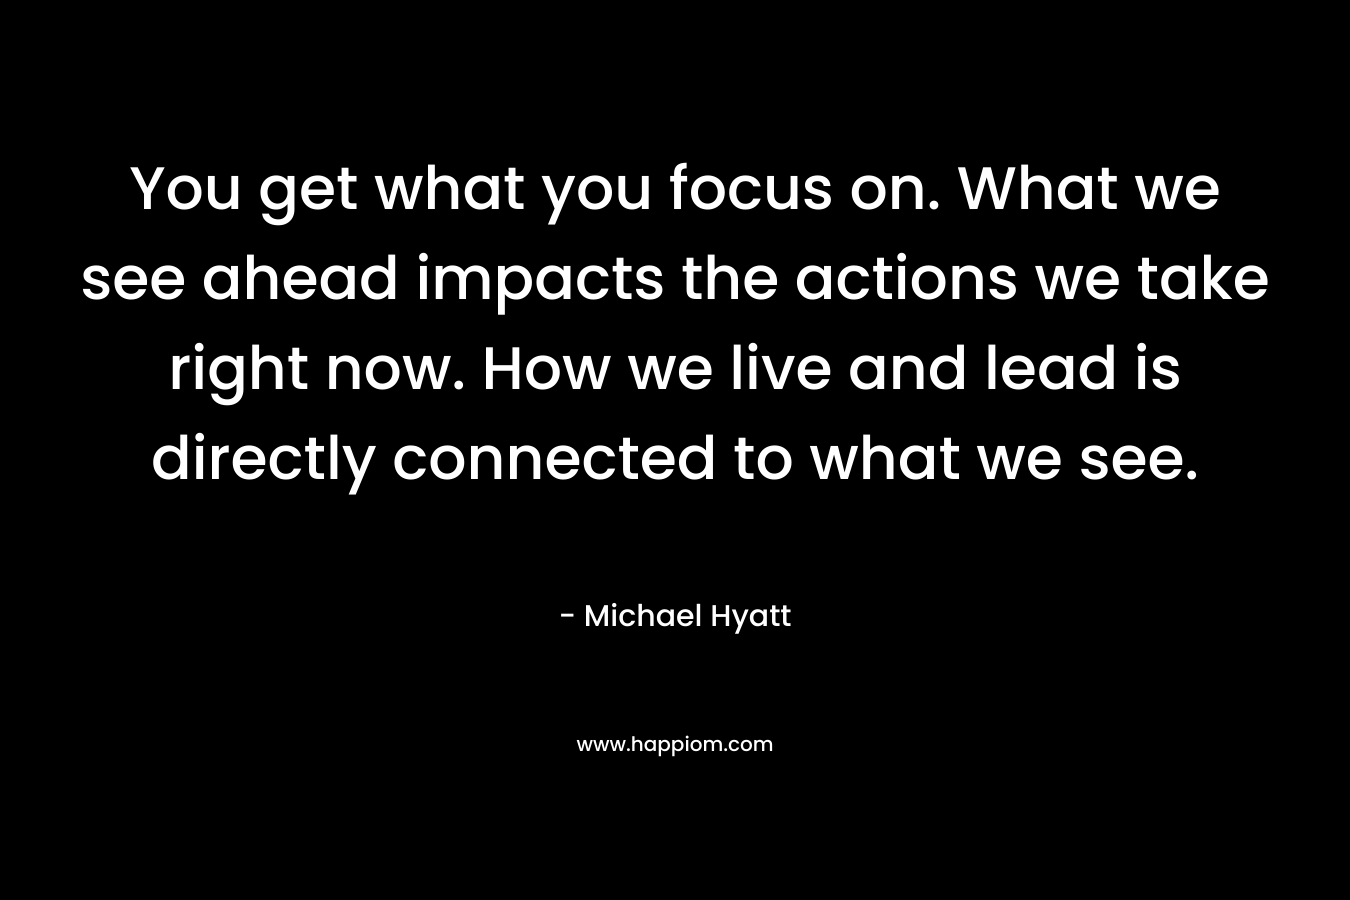 You get what you focus on. What we see ahead impacts the actions we take right now. How we live and lead is directly connected to what we see.